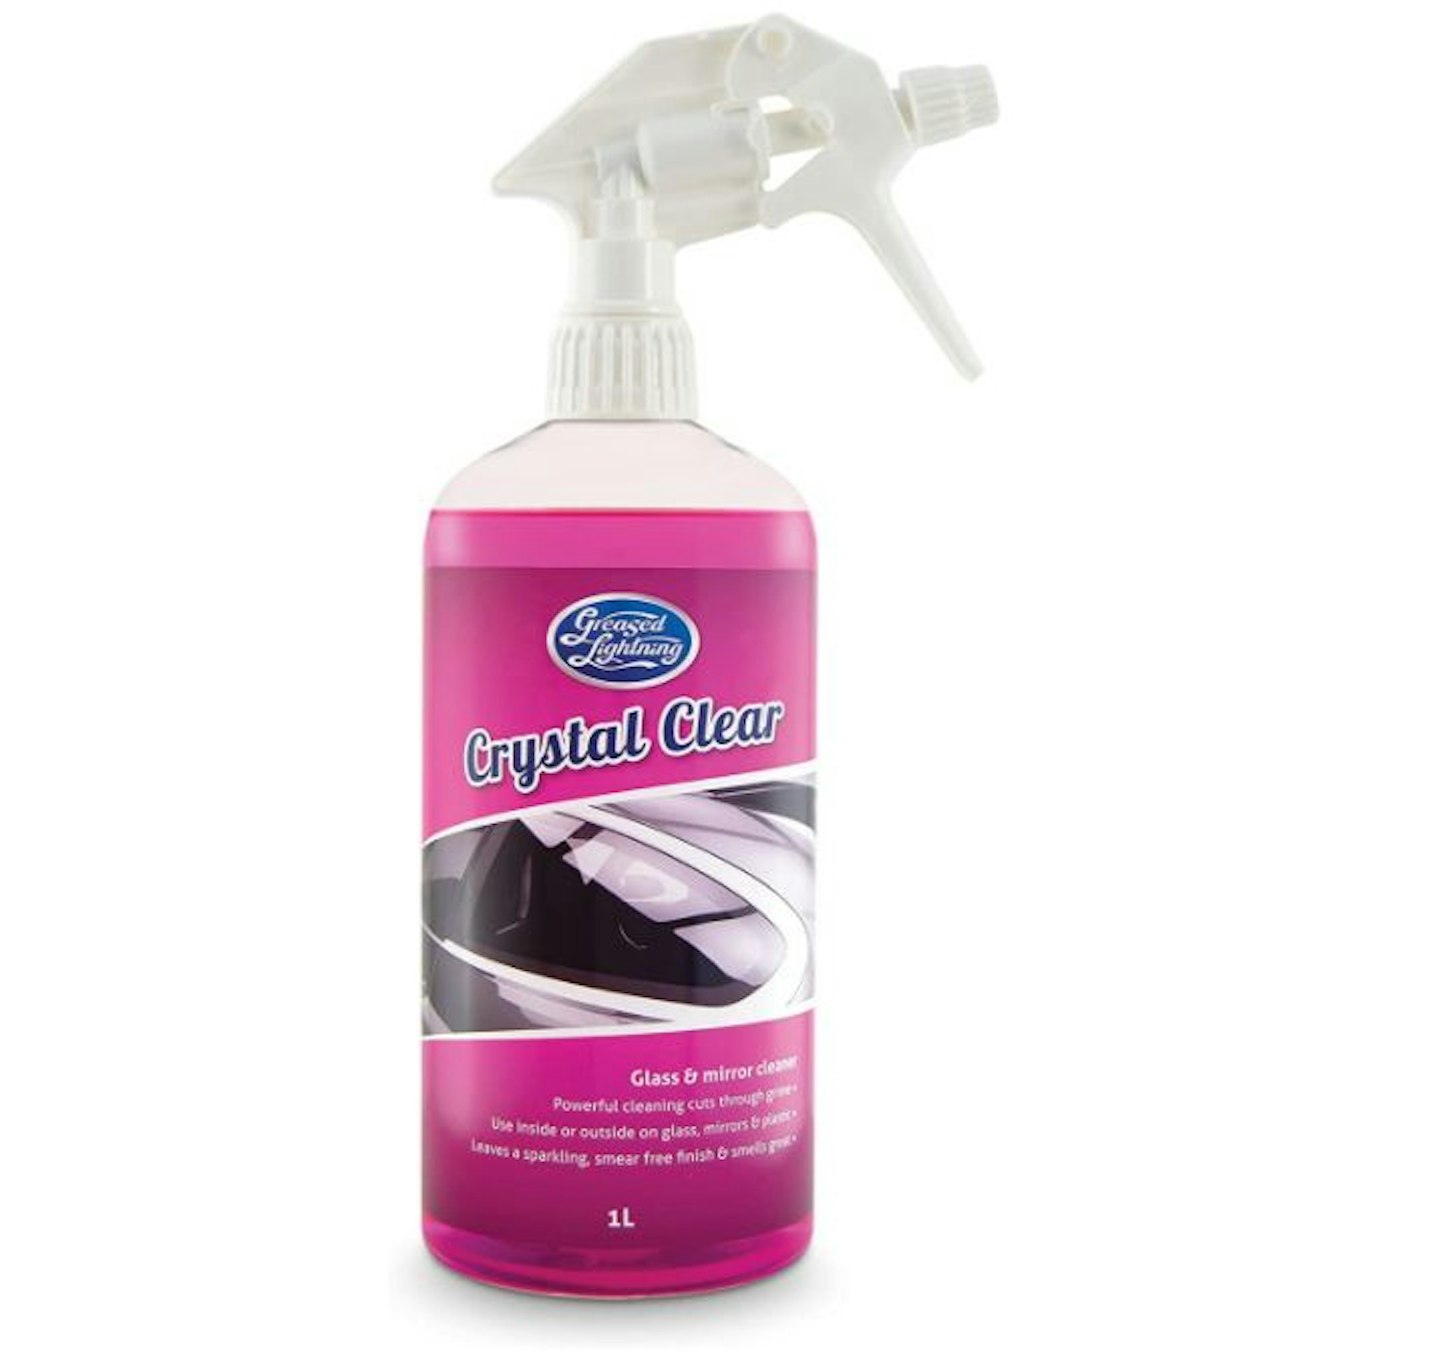 Greased Lightning Crystal Clear Glass and Mirror Cleaner 1L